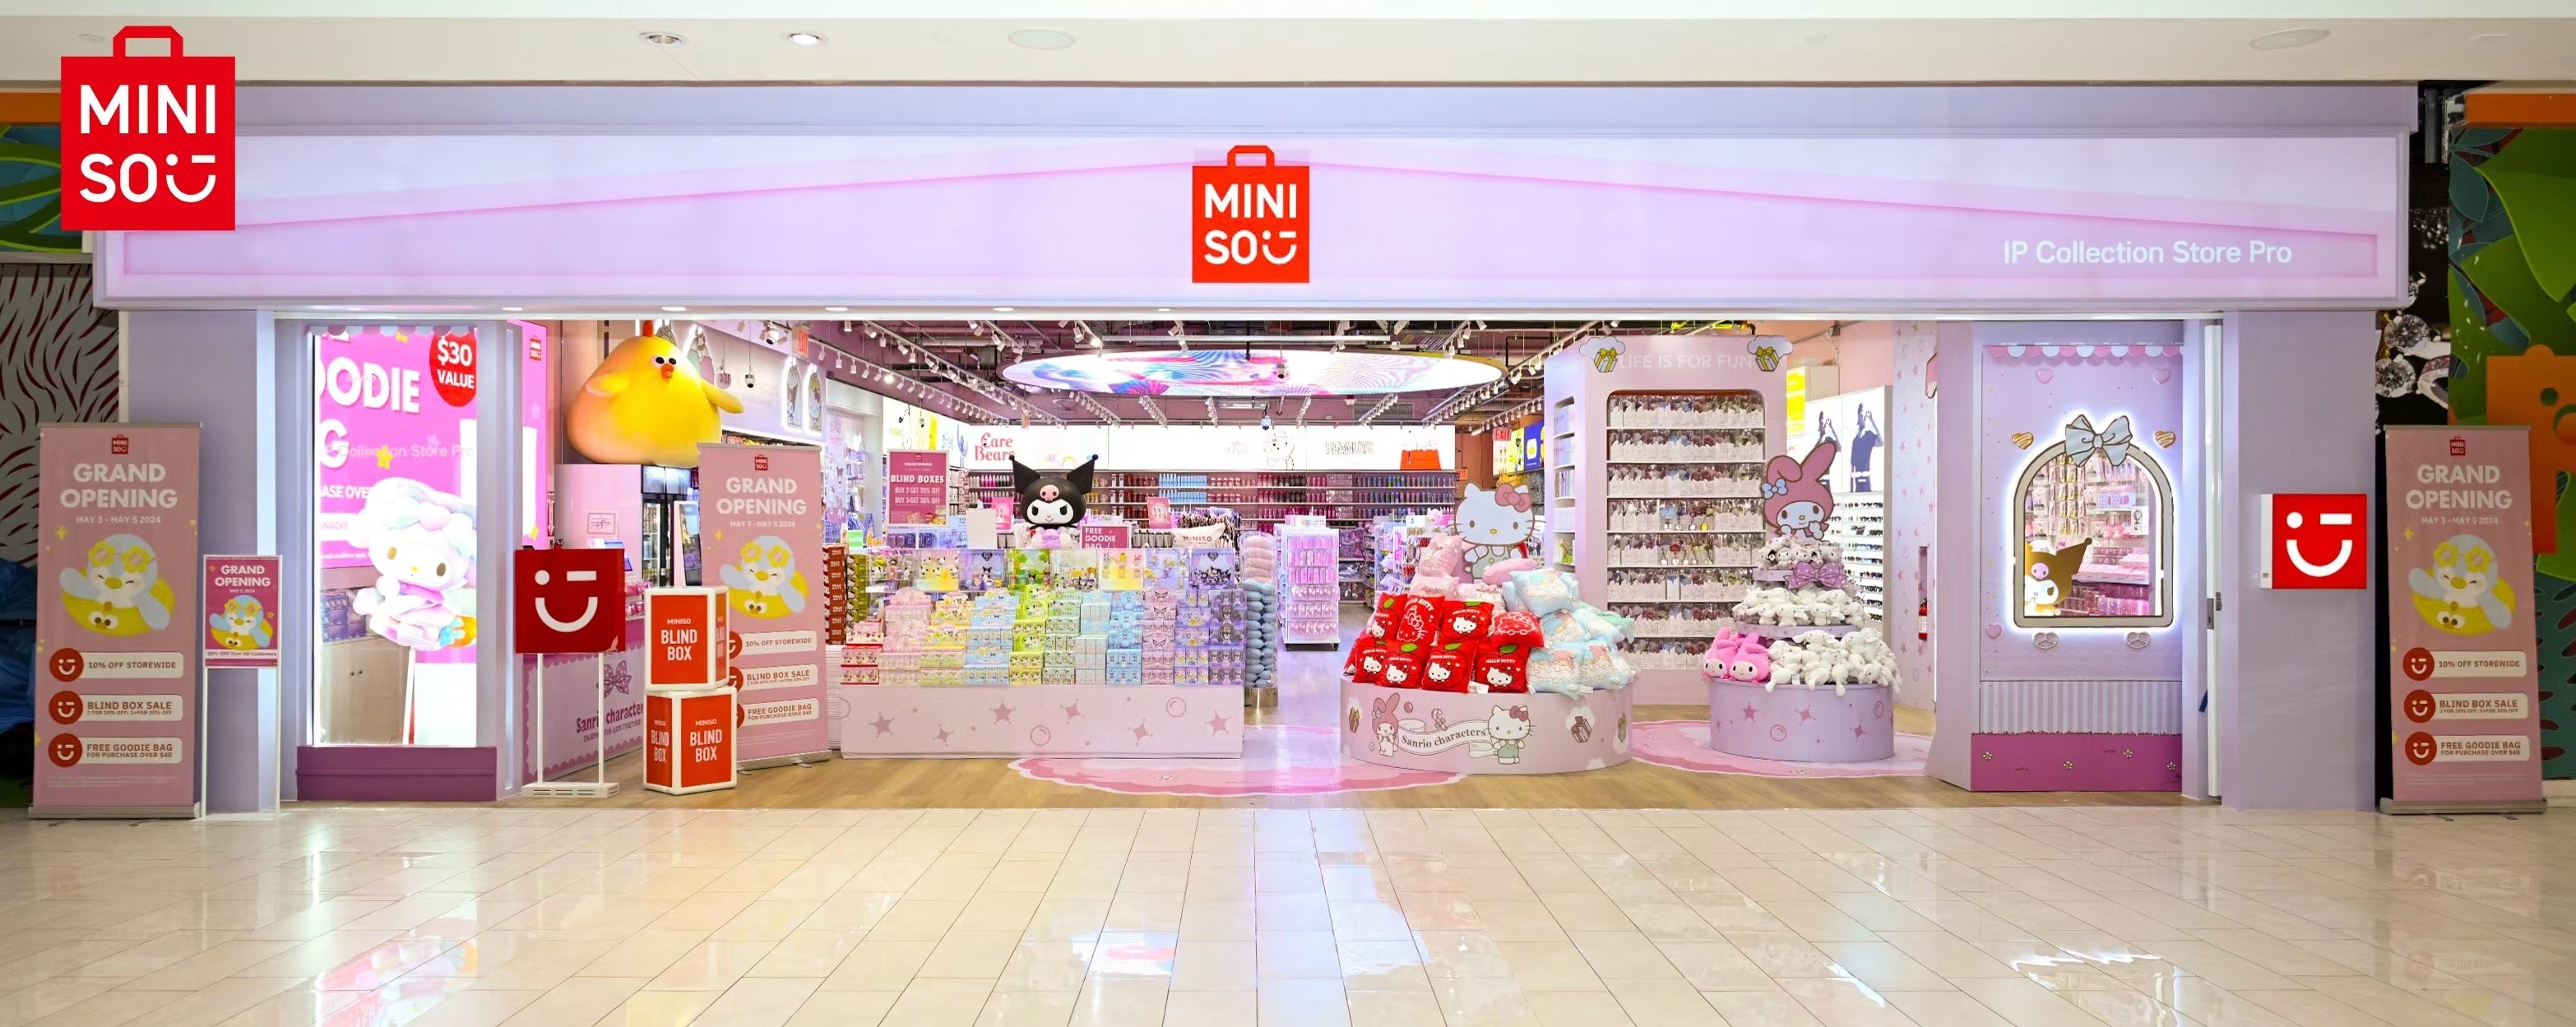 New Jersey’s American Dream Mall hosts Miniso’s first IP Collection Store in the US. Photo: Miniso